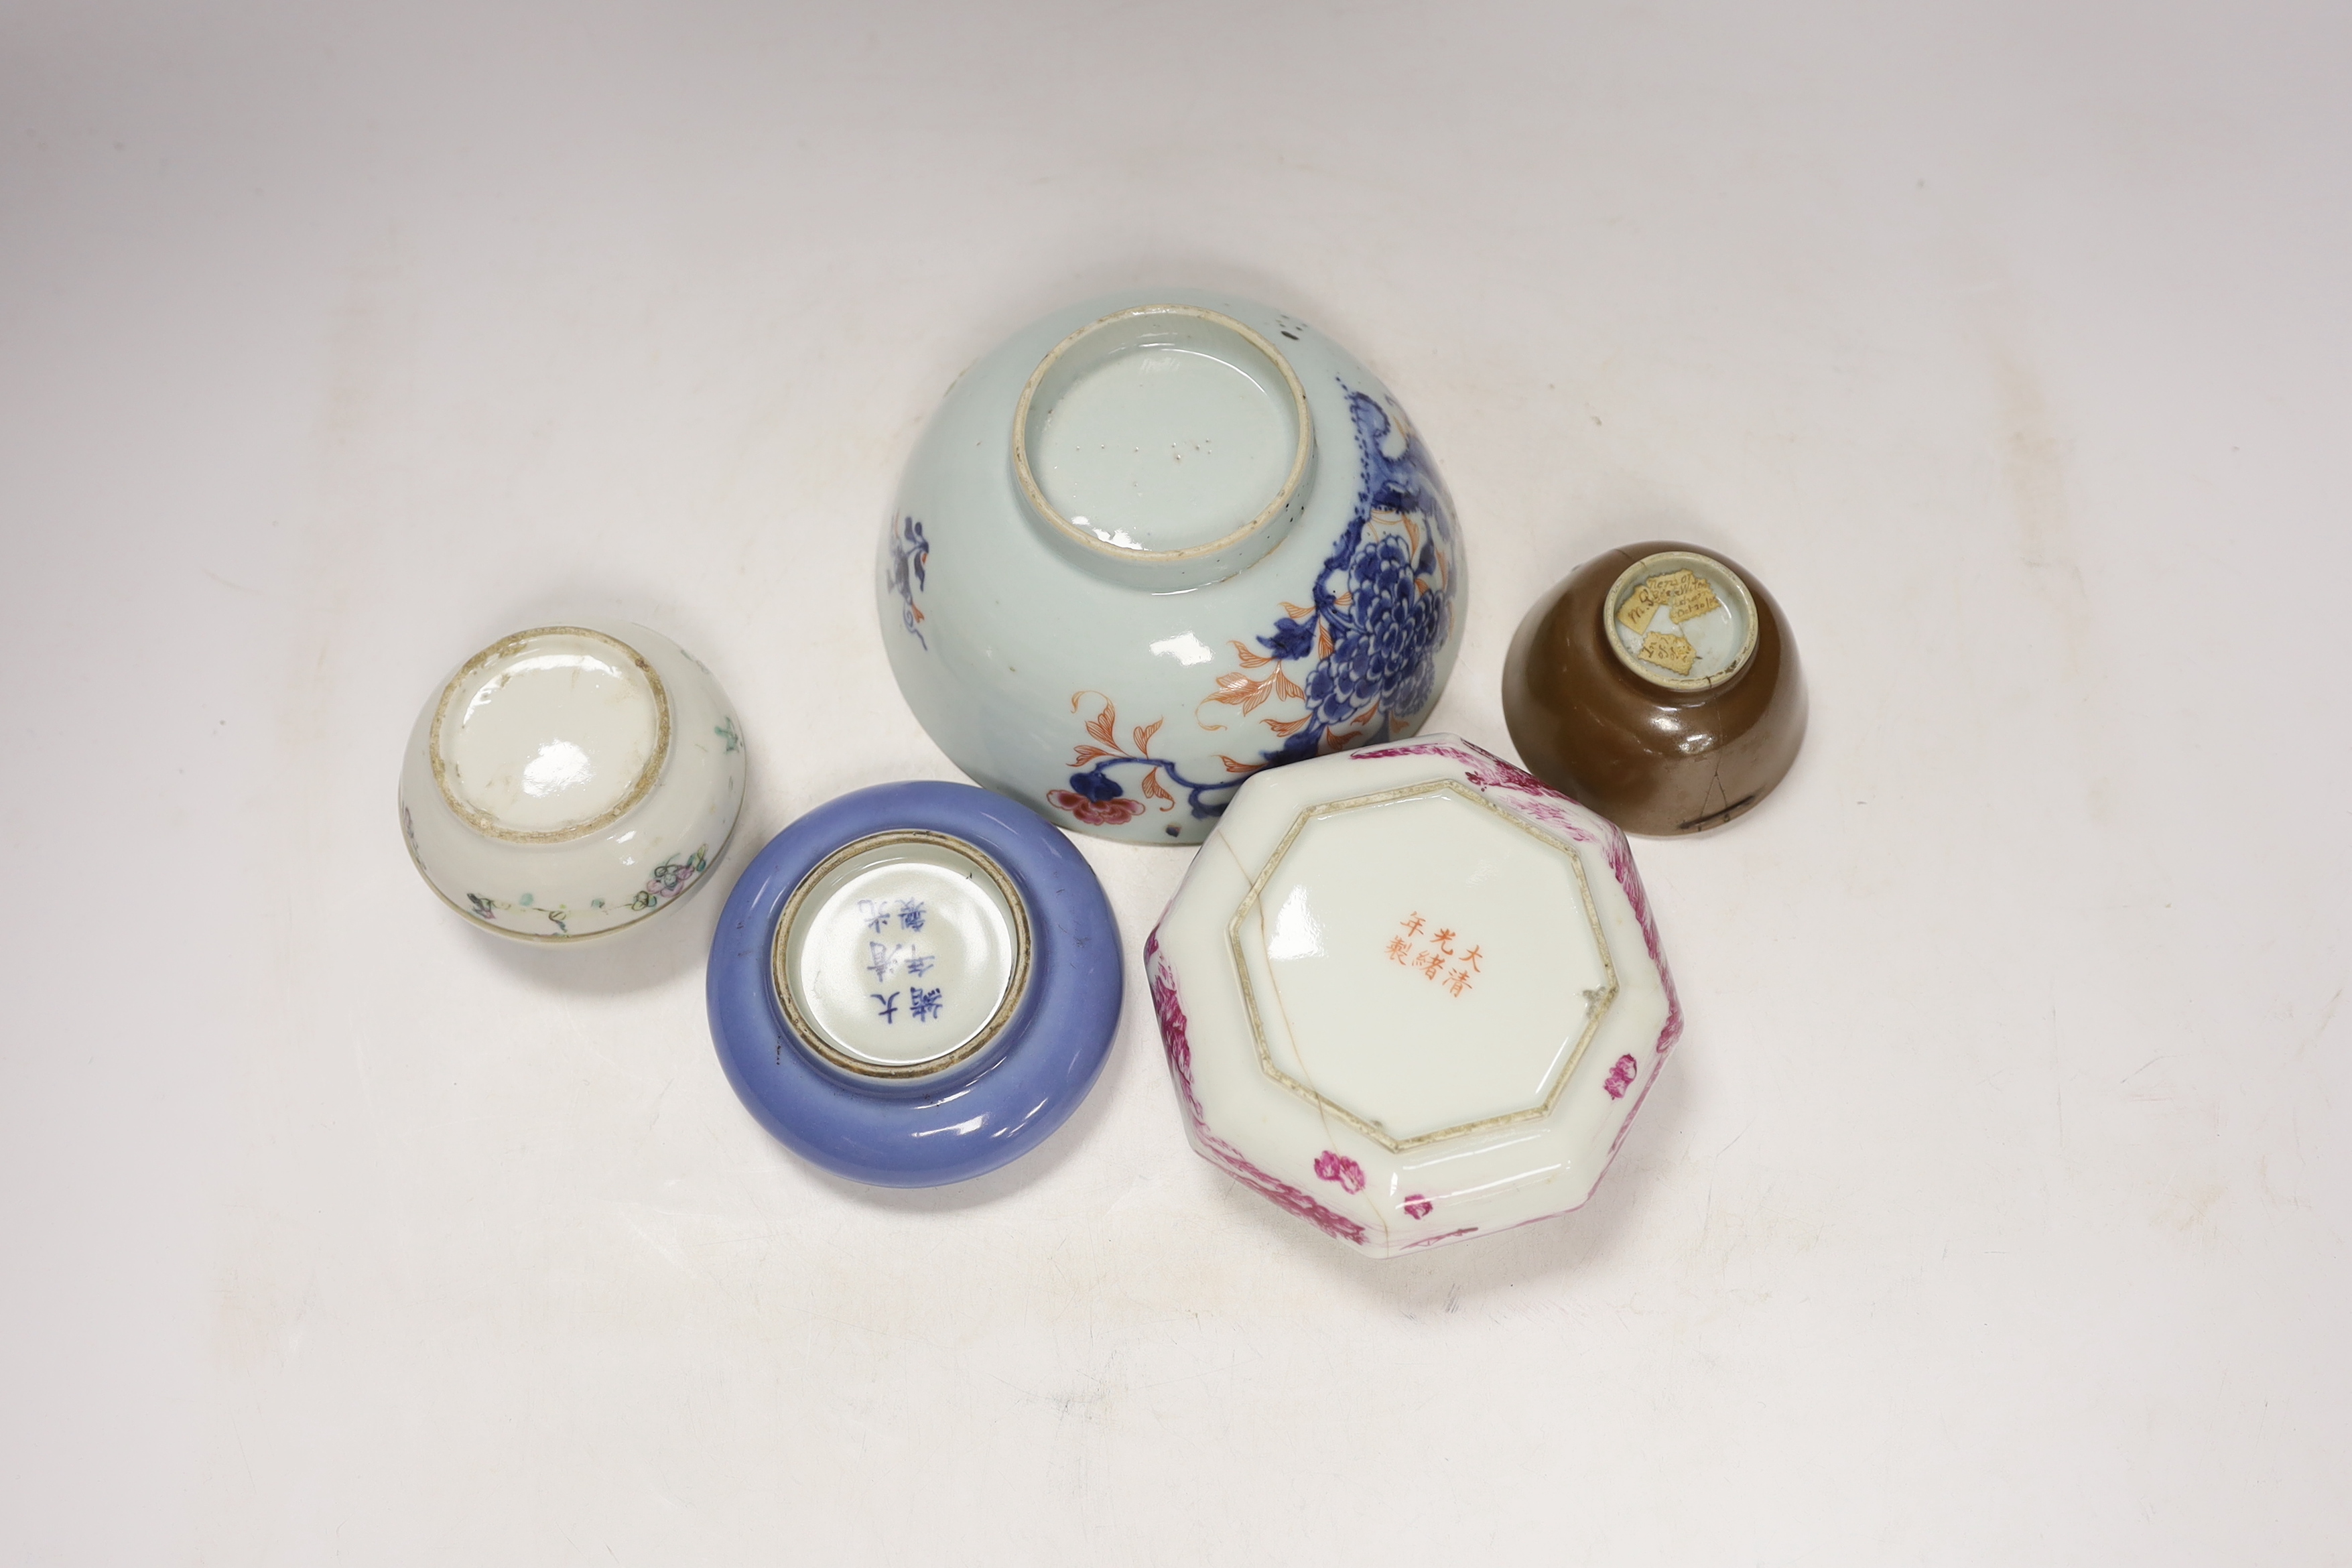 A Chinese Clare de lune glazed brushwasher, a famille rose box and cover, an octagonal puce enamelled brushwasher, an 18th century bowl and teabowl, largest 15cm in diameter (5)